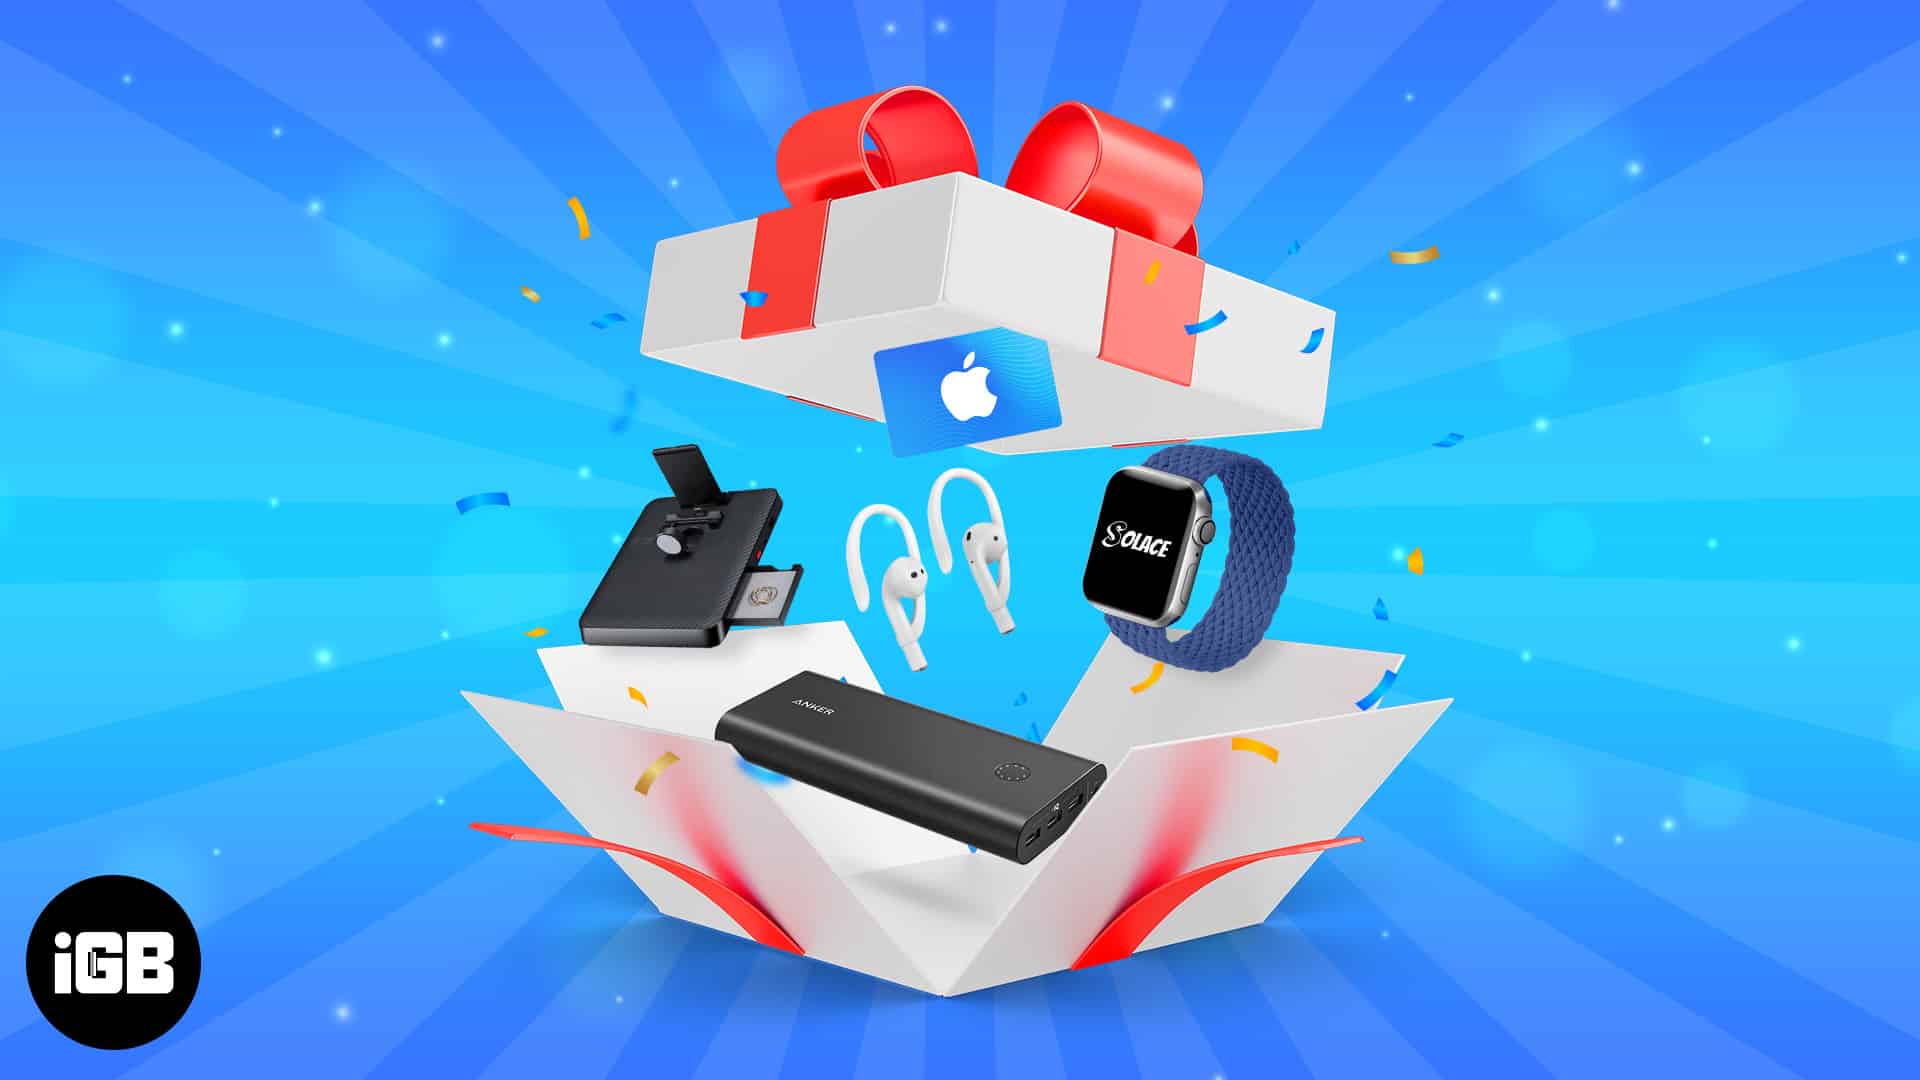 Geeky gift ideas for apple enthusiasts in your life